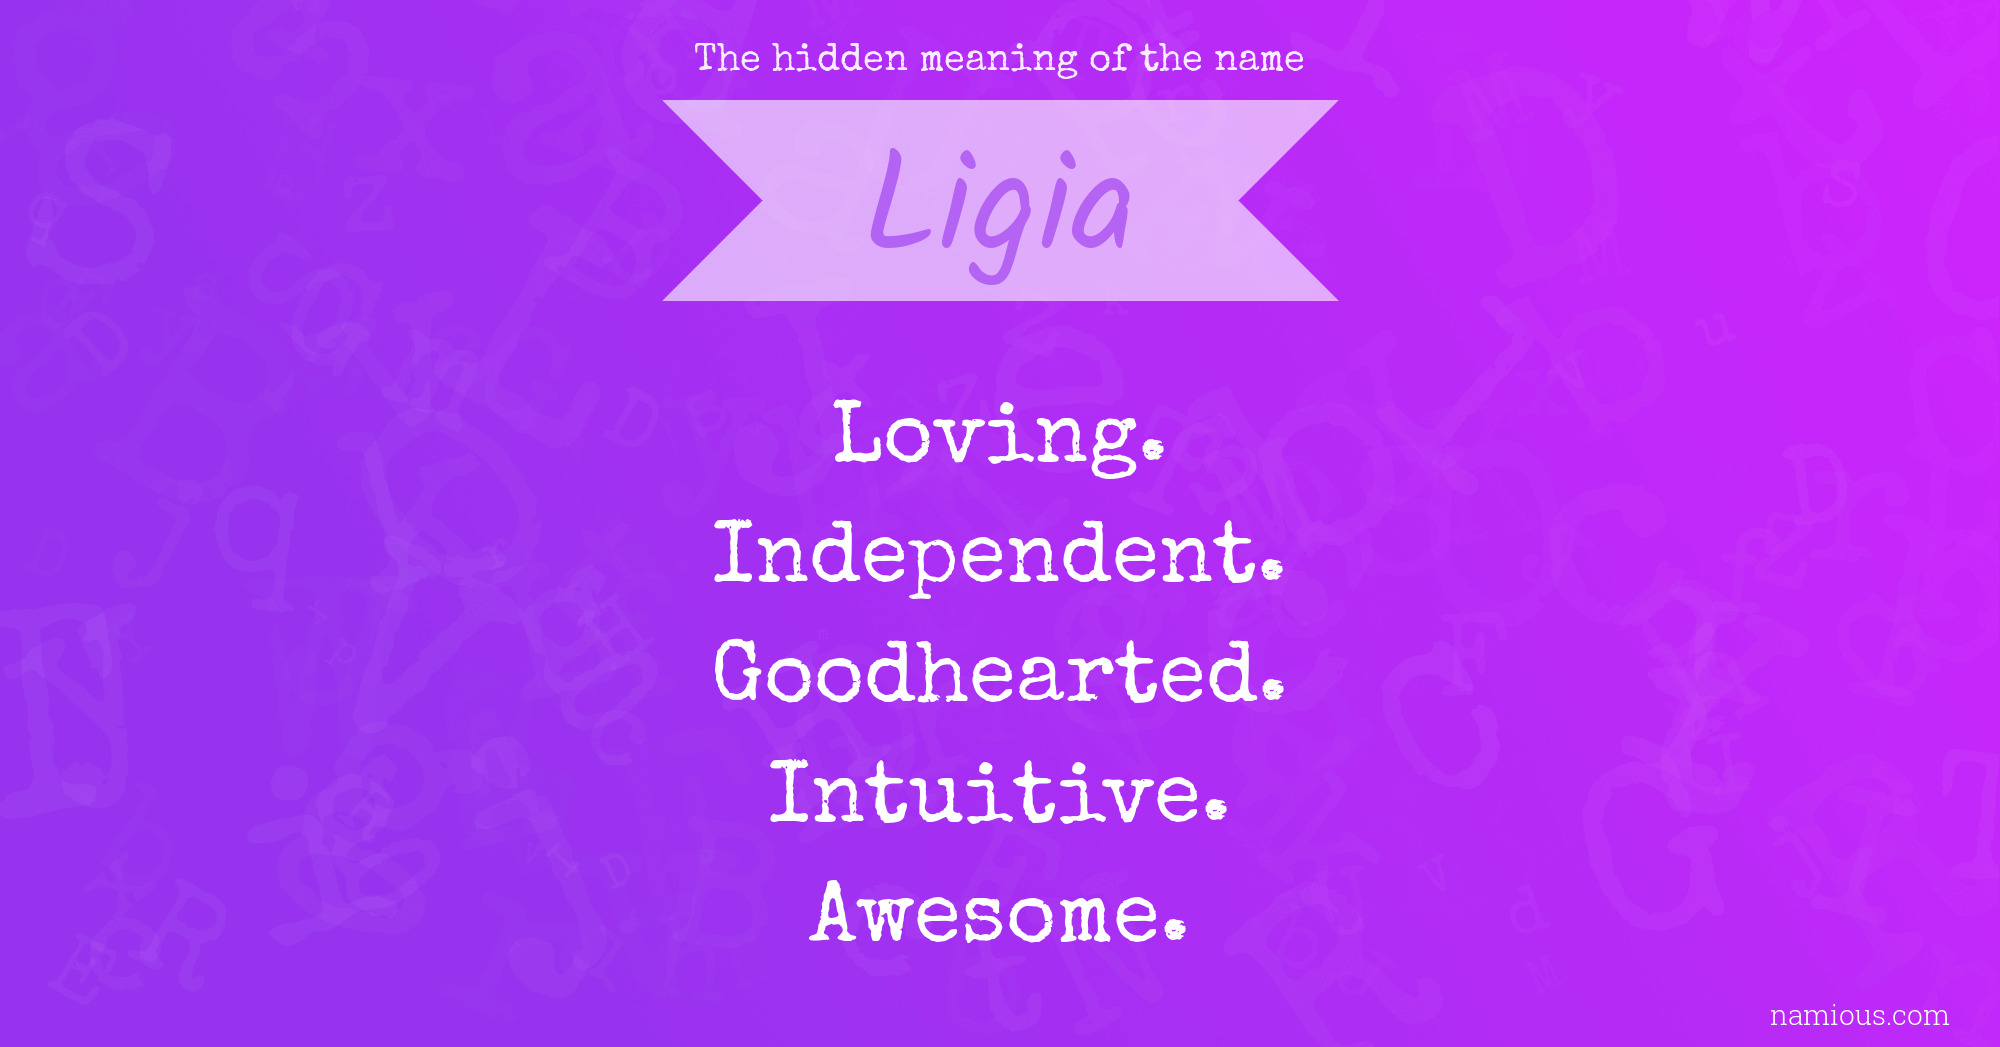 The hidden meaning of the name Ligia